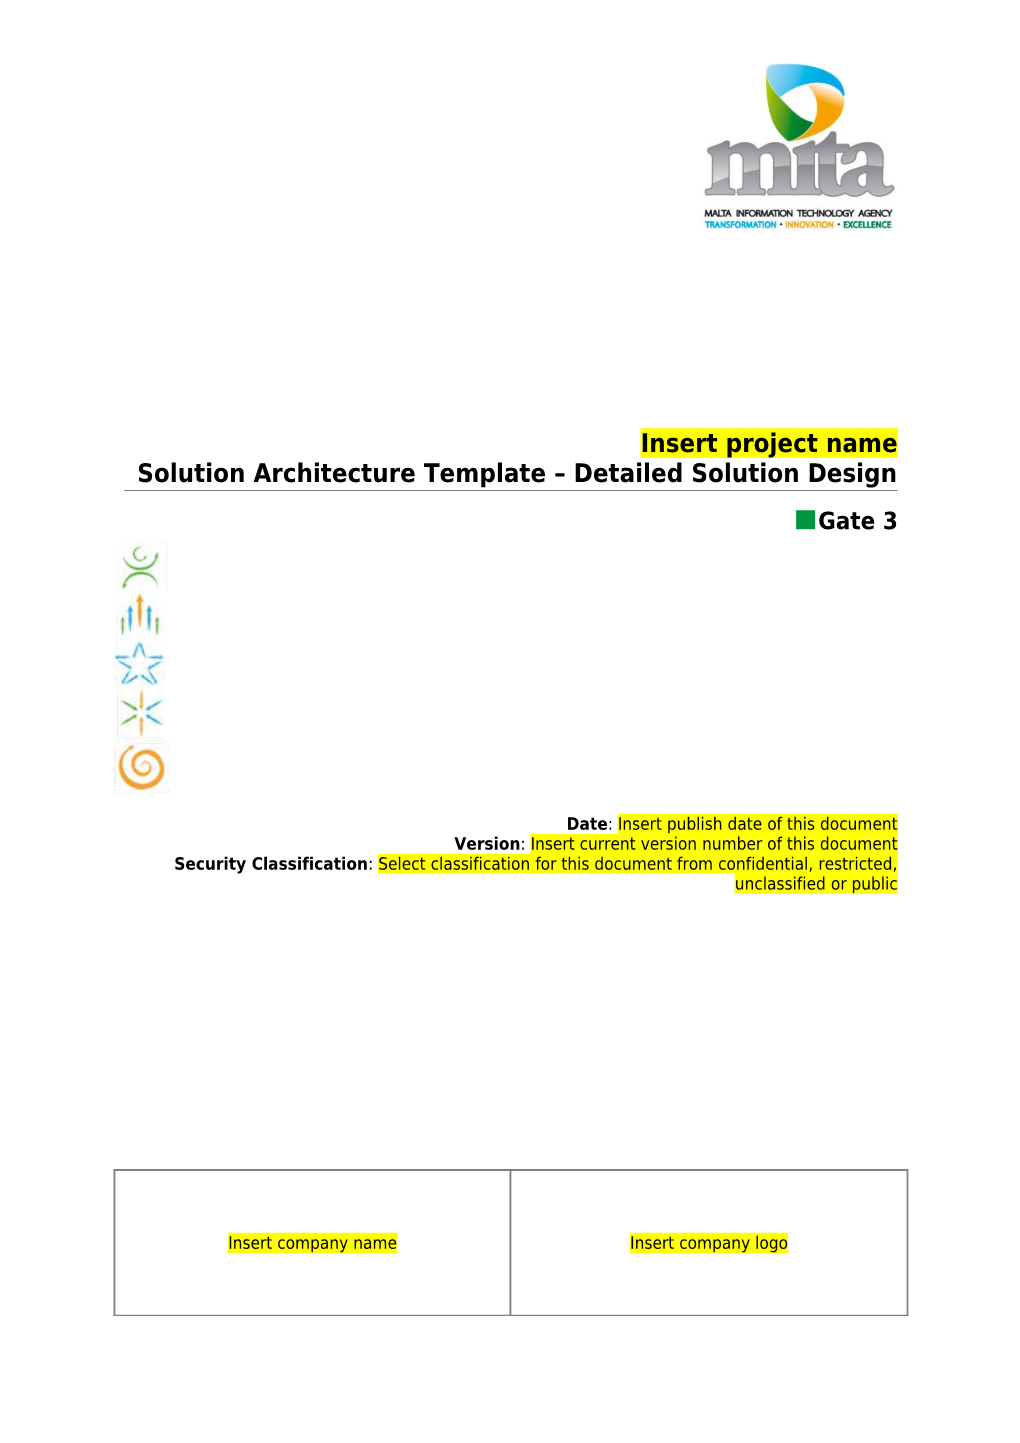 Solution Architecture Template Detailed Solution Design